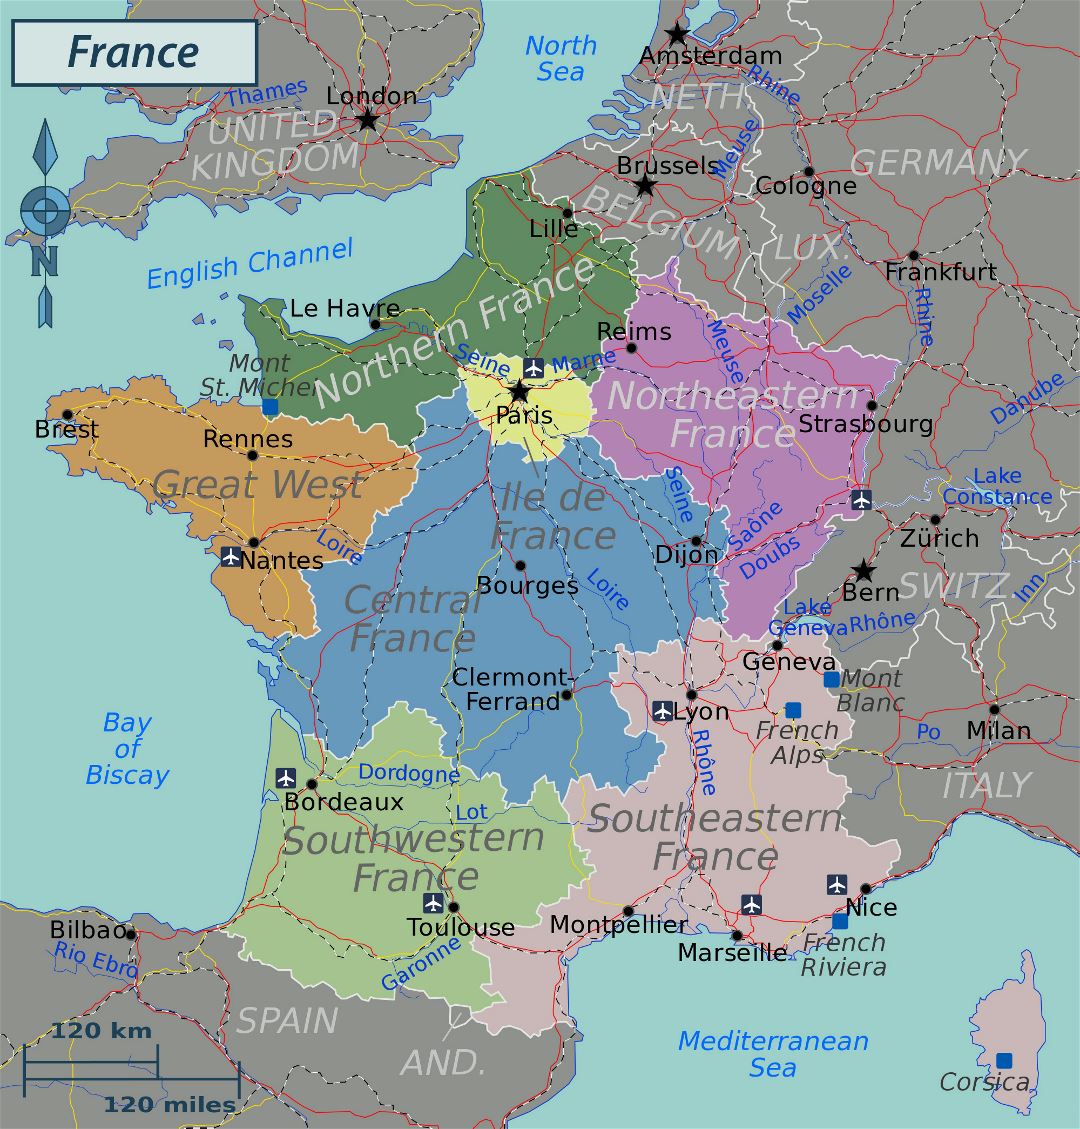 Large regions map of France